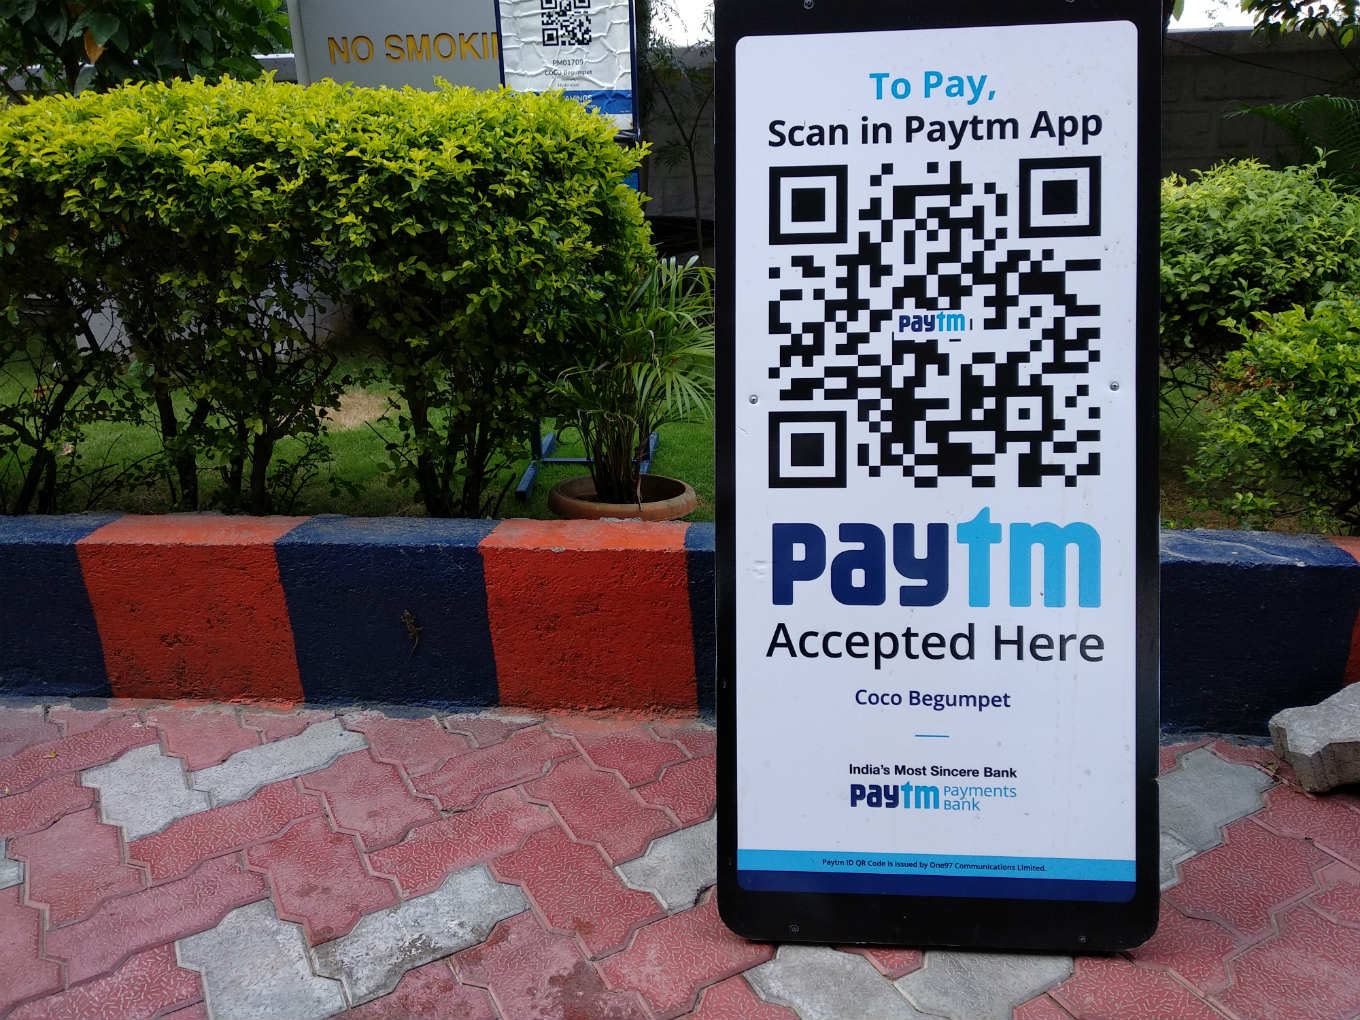 Paytm Raises $2 Bn Funding From SoftBank, Ant Financial, T Rowe Price